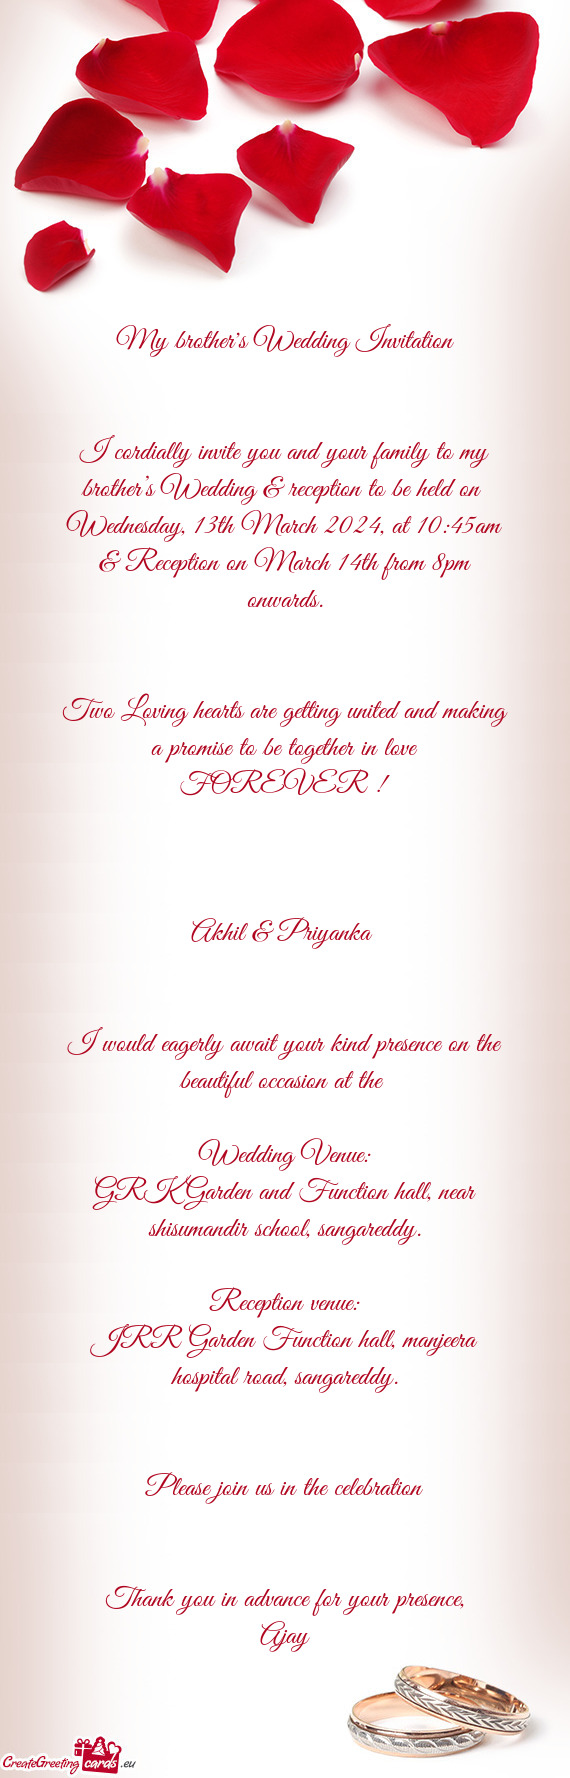 I cordially invite you and your family to my brother’s Wedding & reception to be held on